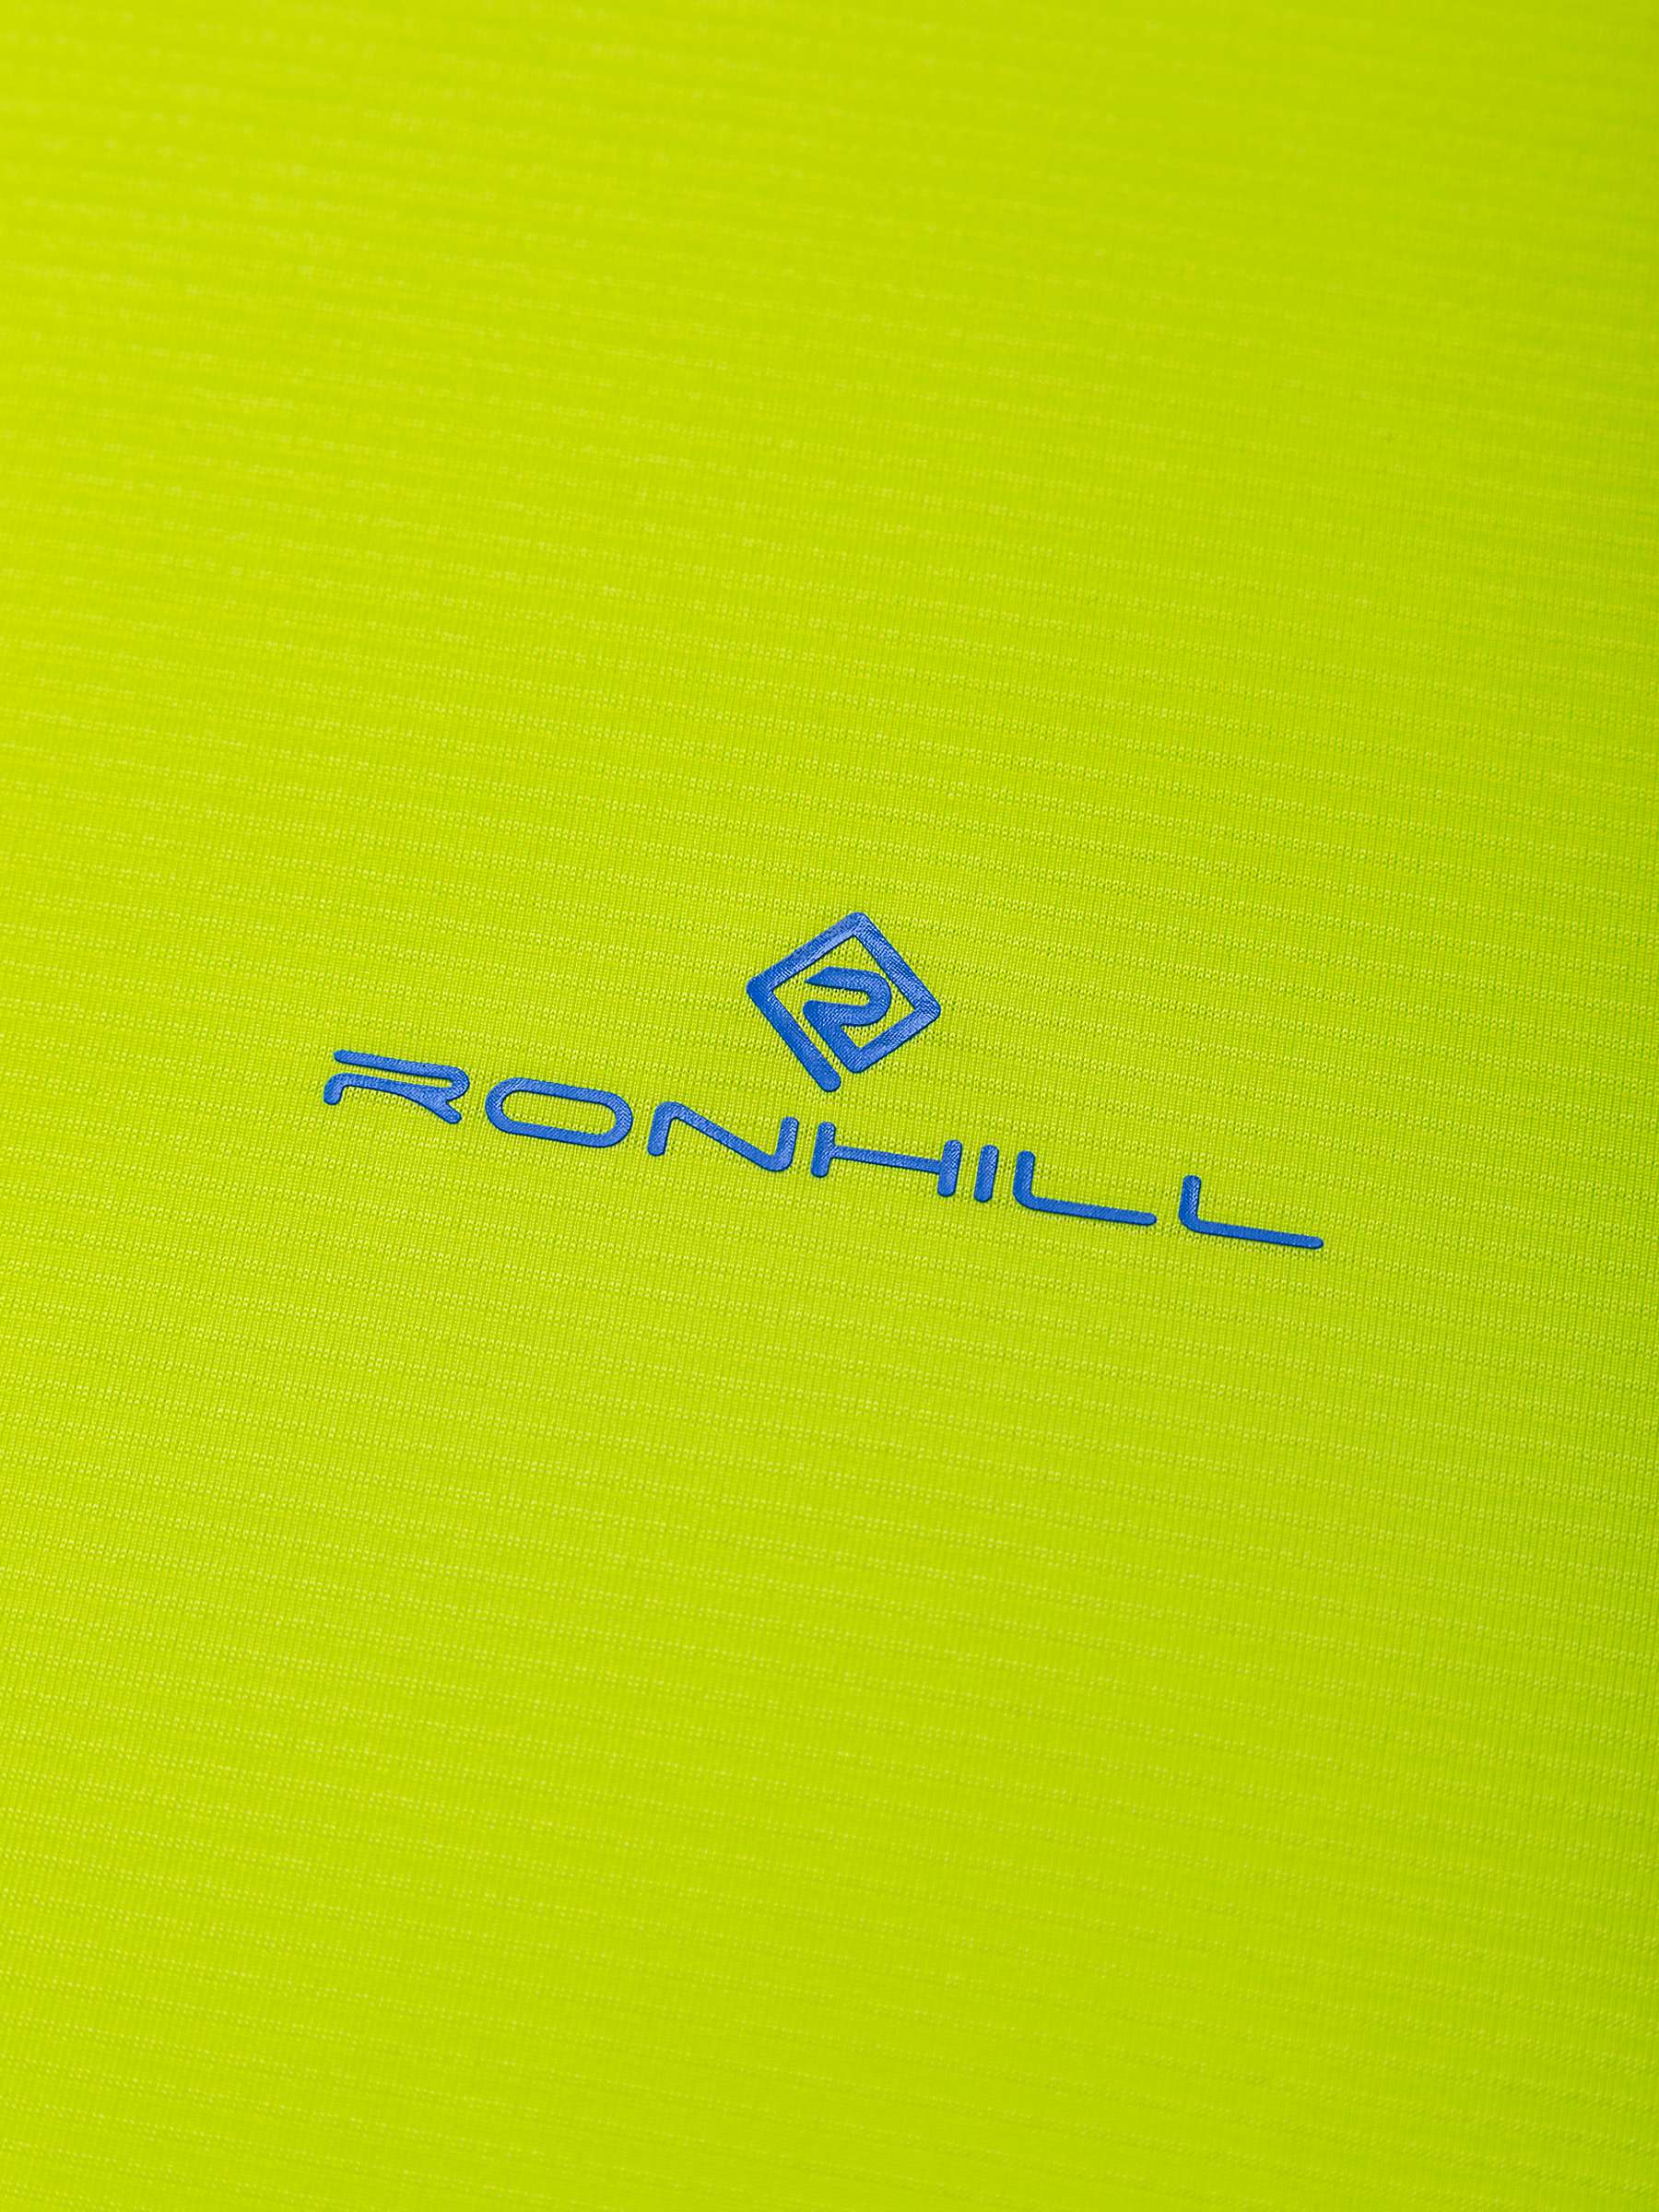 Buy Ronhill Sports Top, Yellow Online at johnlewis.com